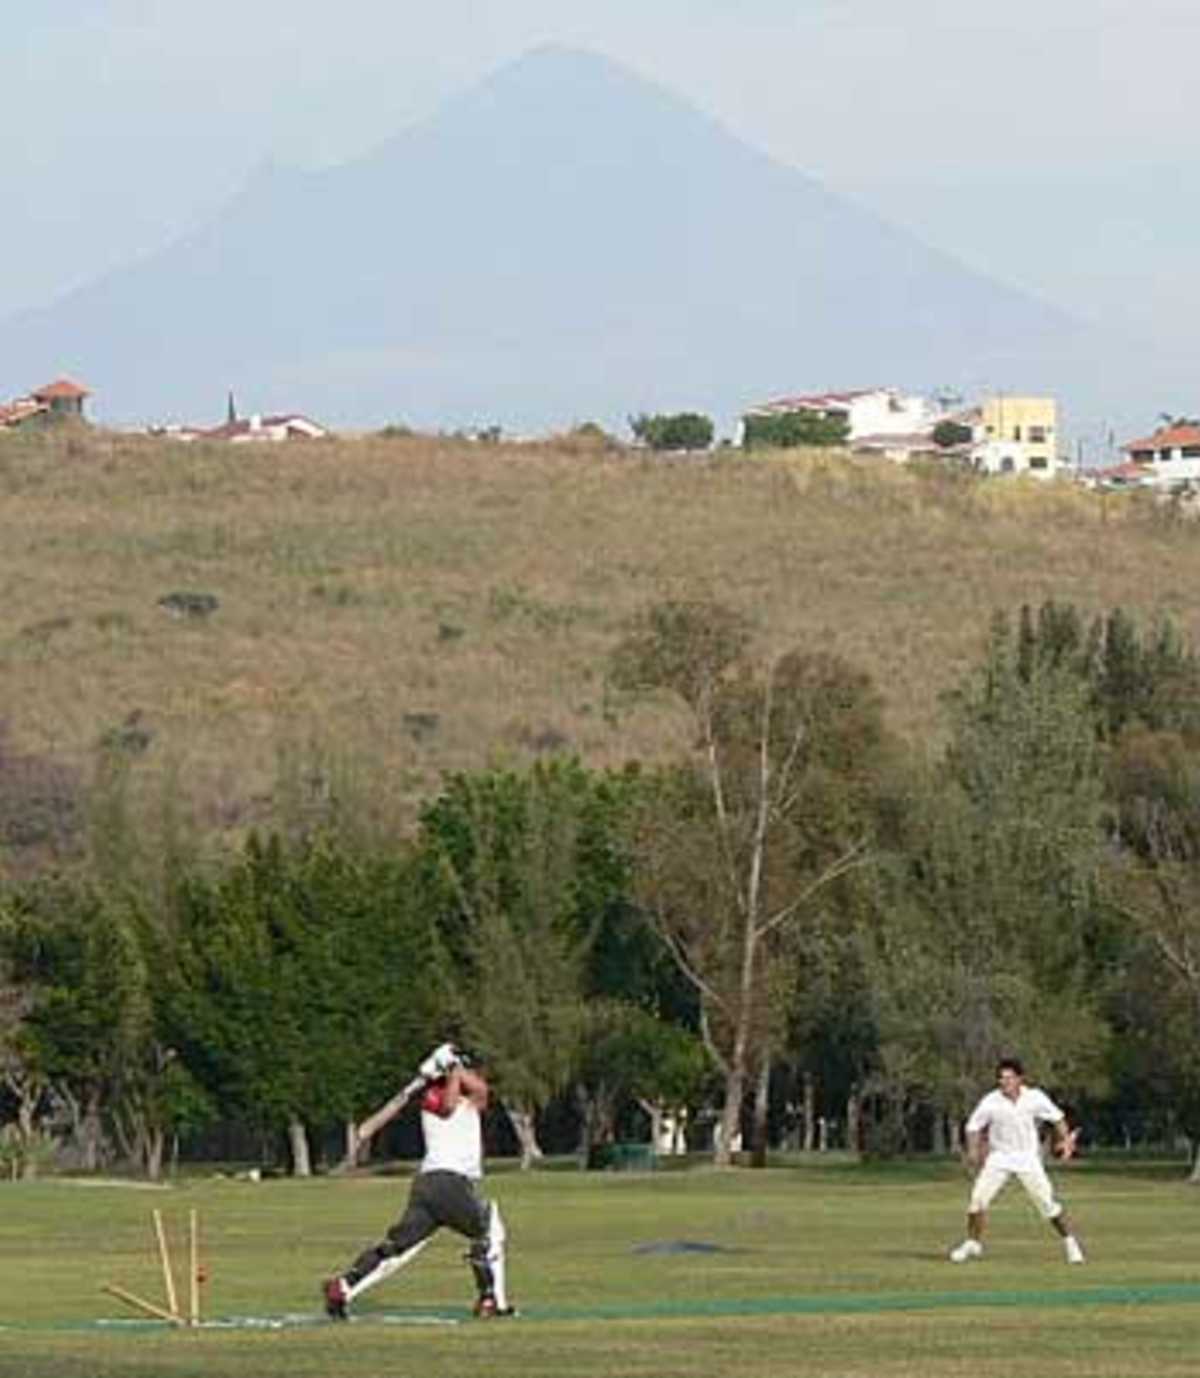 Cricket in Mexico in the town of Oaxtepec